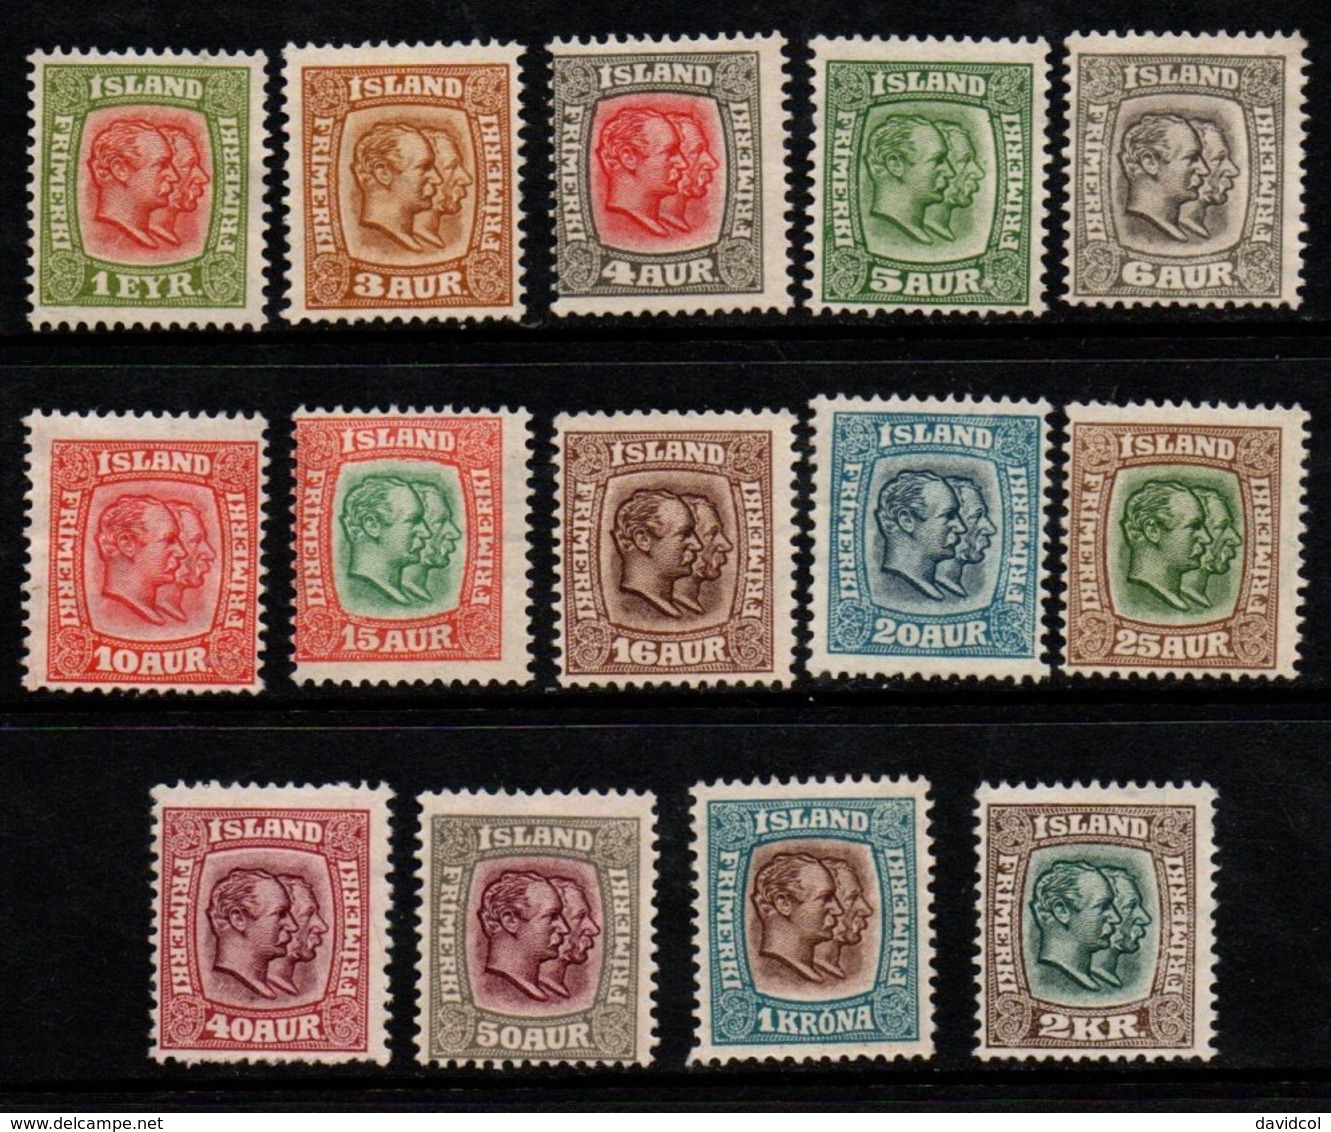 S306.-. ICELAND - 1907-1908 - SC#: 71-84 - MNG - KINGS CHRISTIAN IX AND FREDERIK VIII - SCV: US$ 380.00 - Unused Stamps